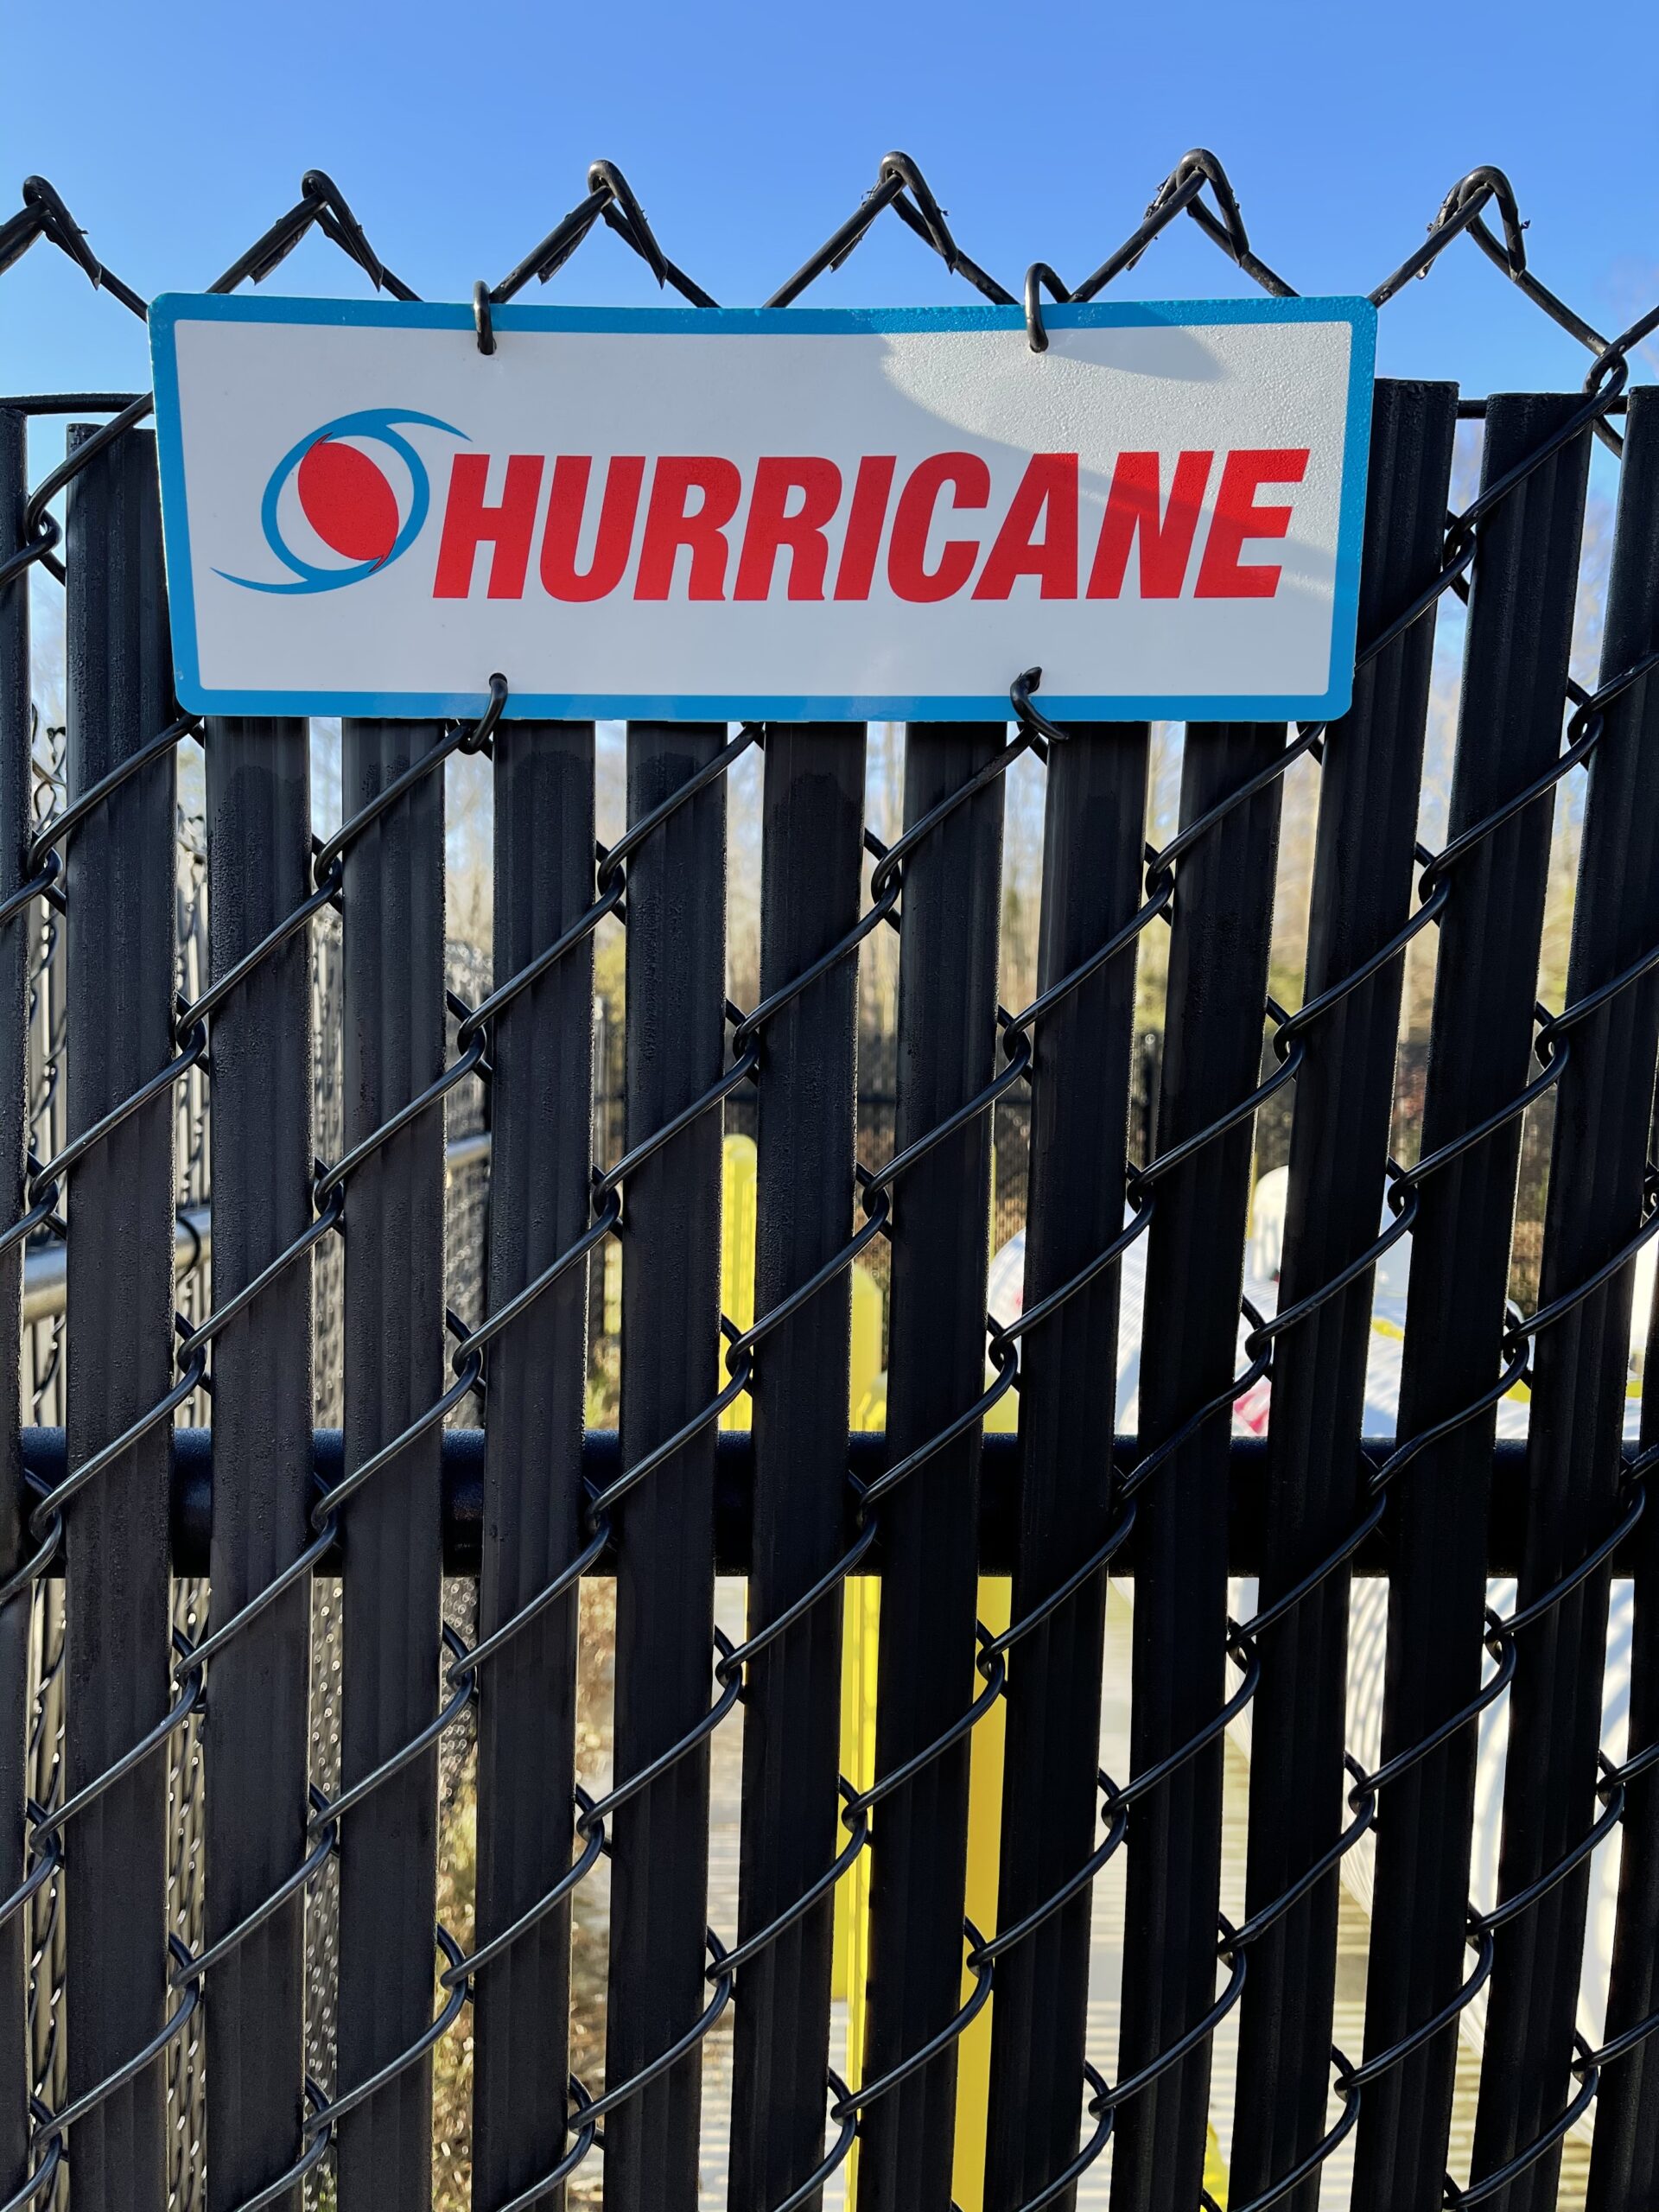 Black galvanized chain link fencing including vertical privacy slats with a Hurricane Fence Company sign attached.